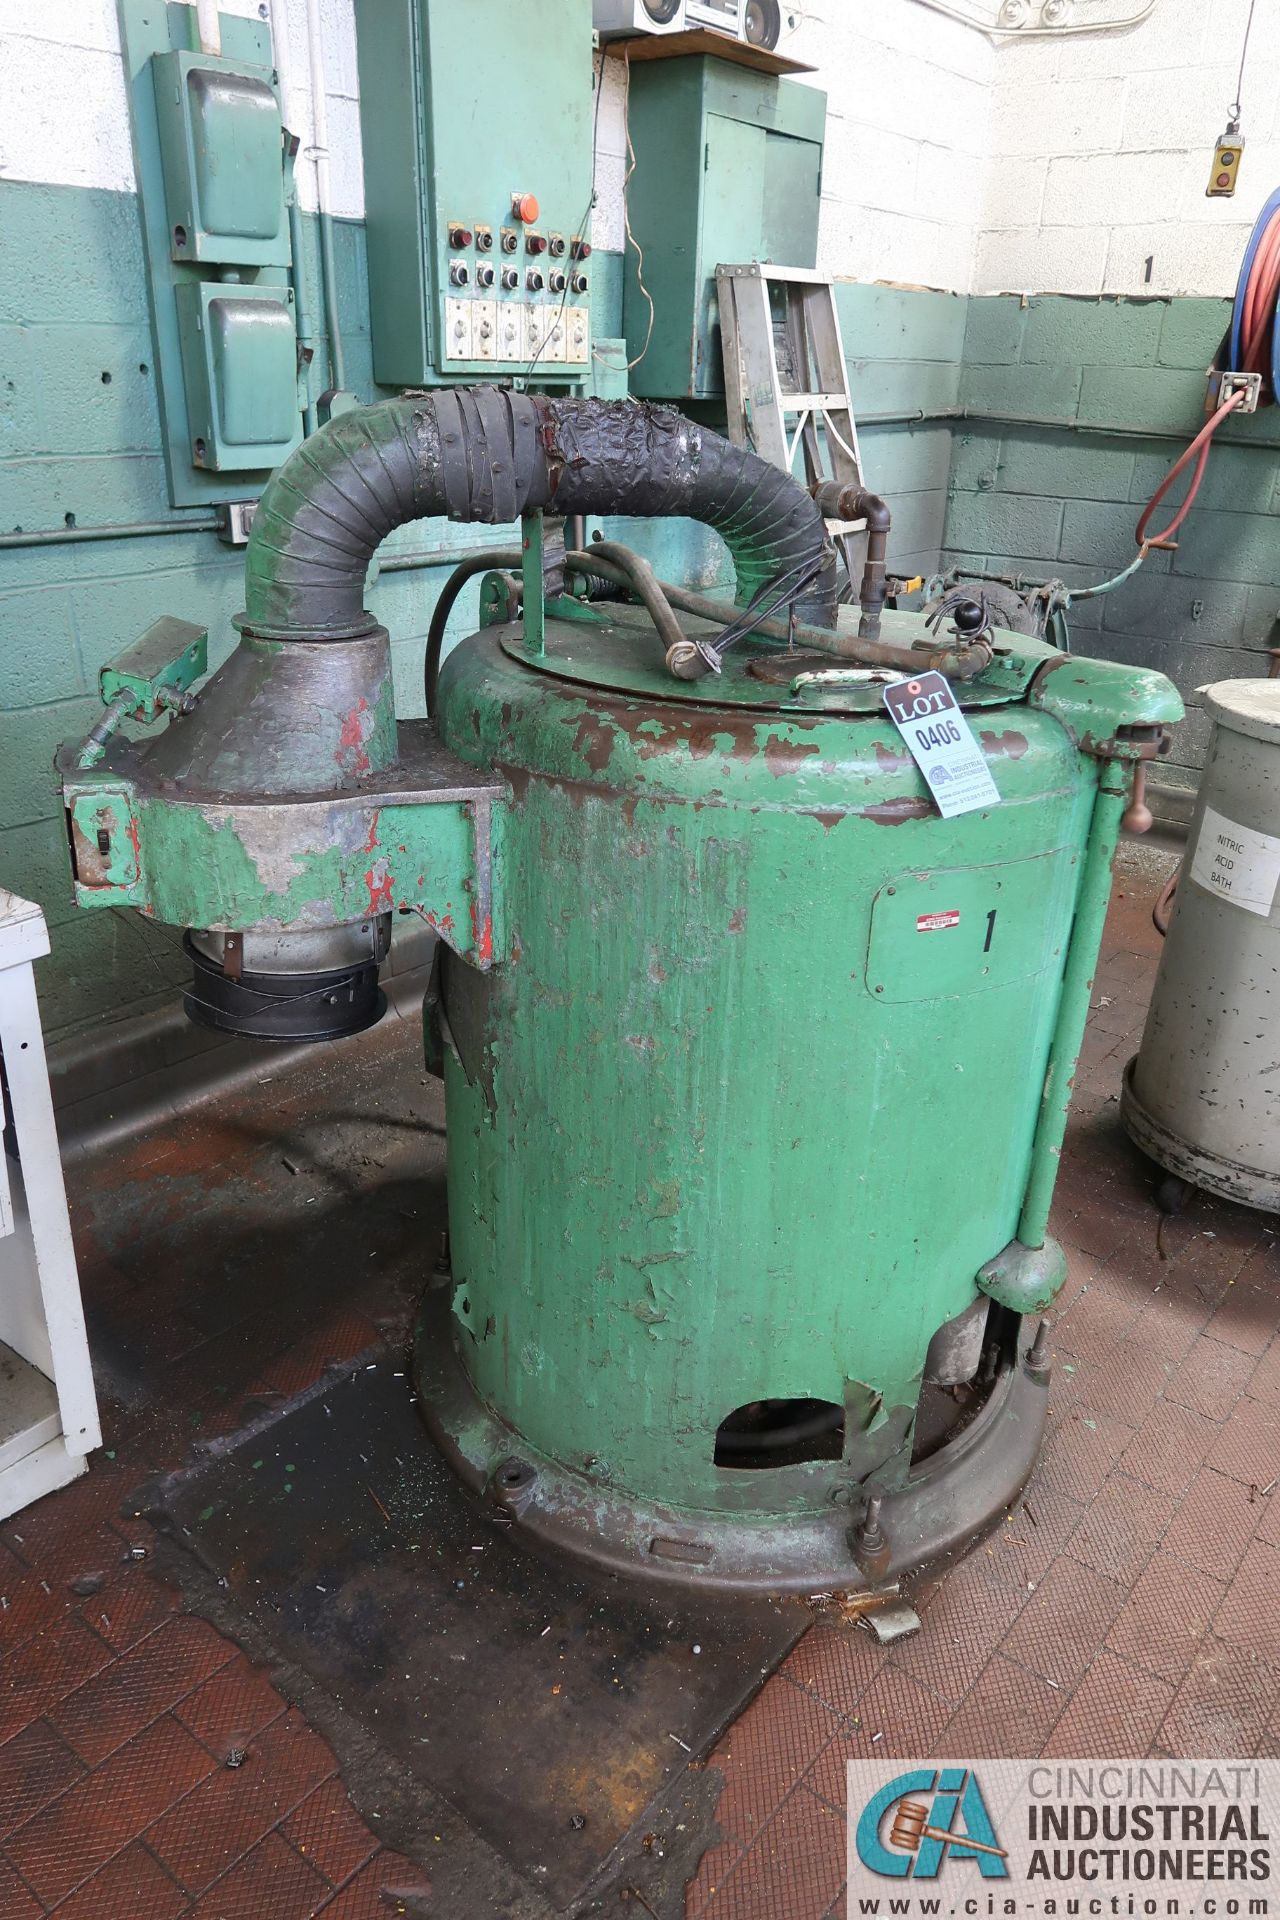 28" DIA. X 18" DEEP BARRETT SPIN TYPE PARTS DRYER WITH BASKET - Loading fee due the "ERRA"